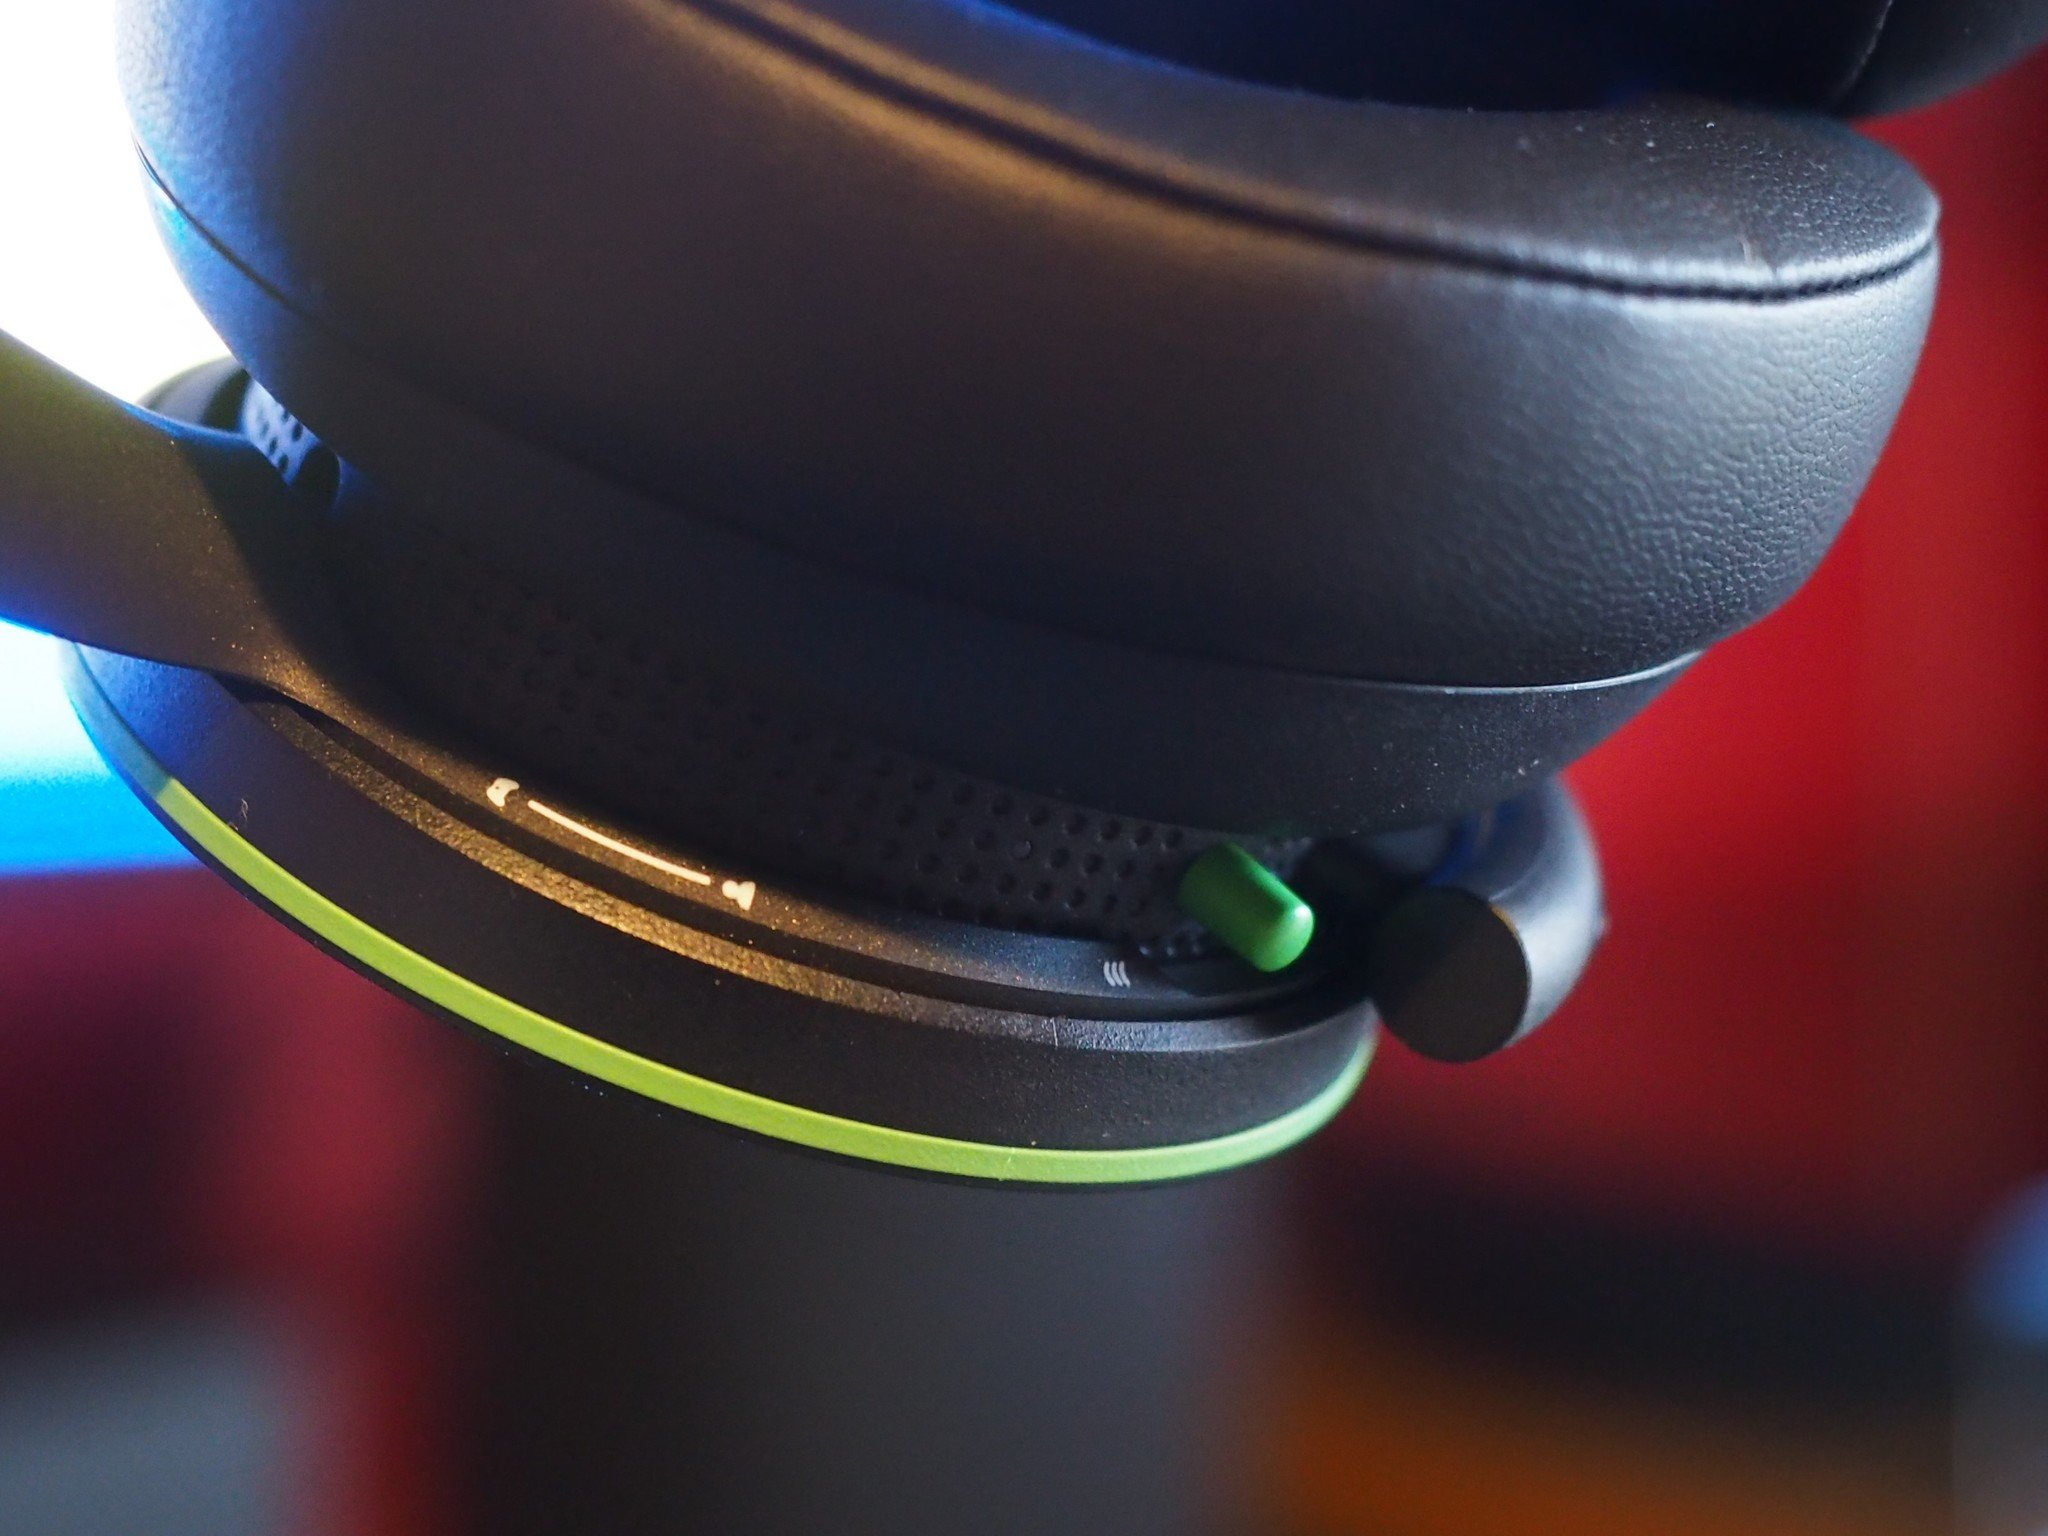 Official Xbox Wireless Headset Review Shots